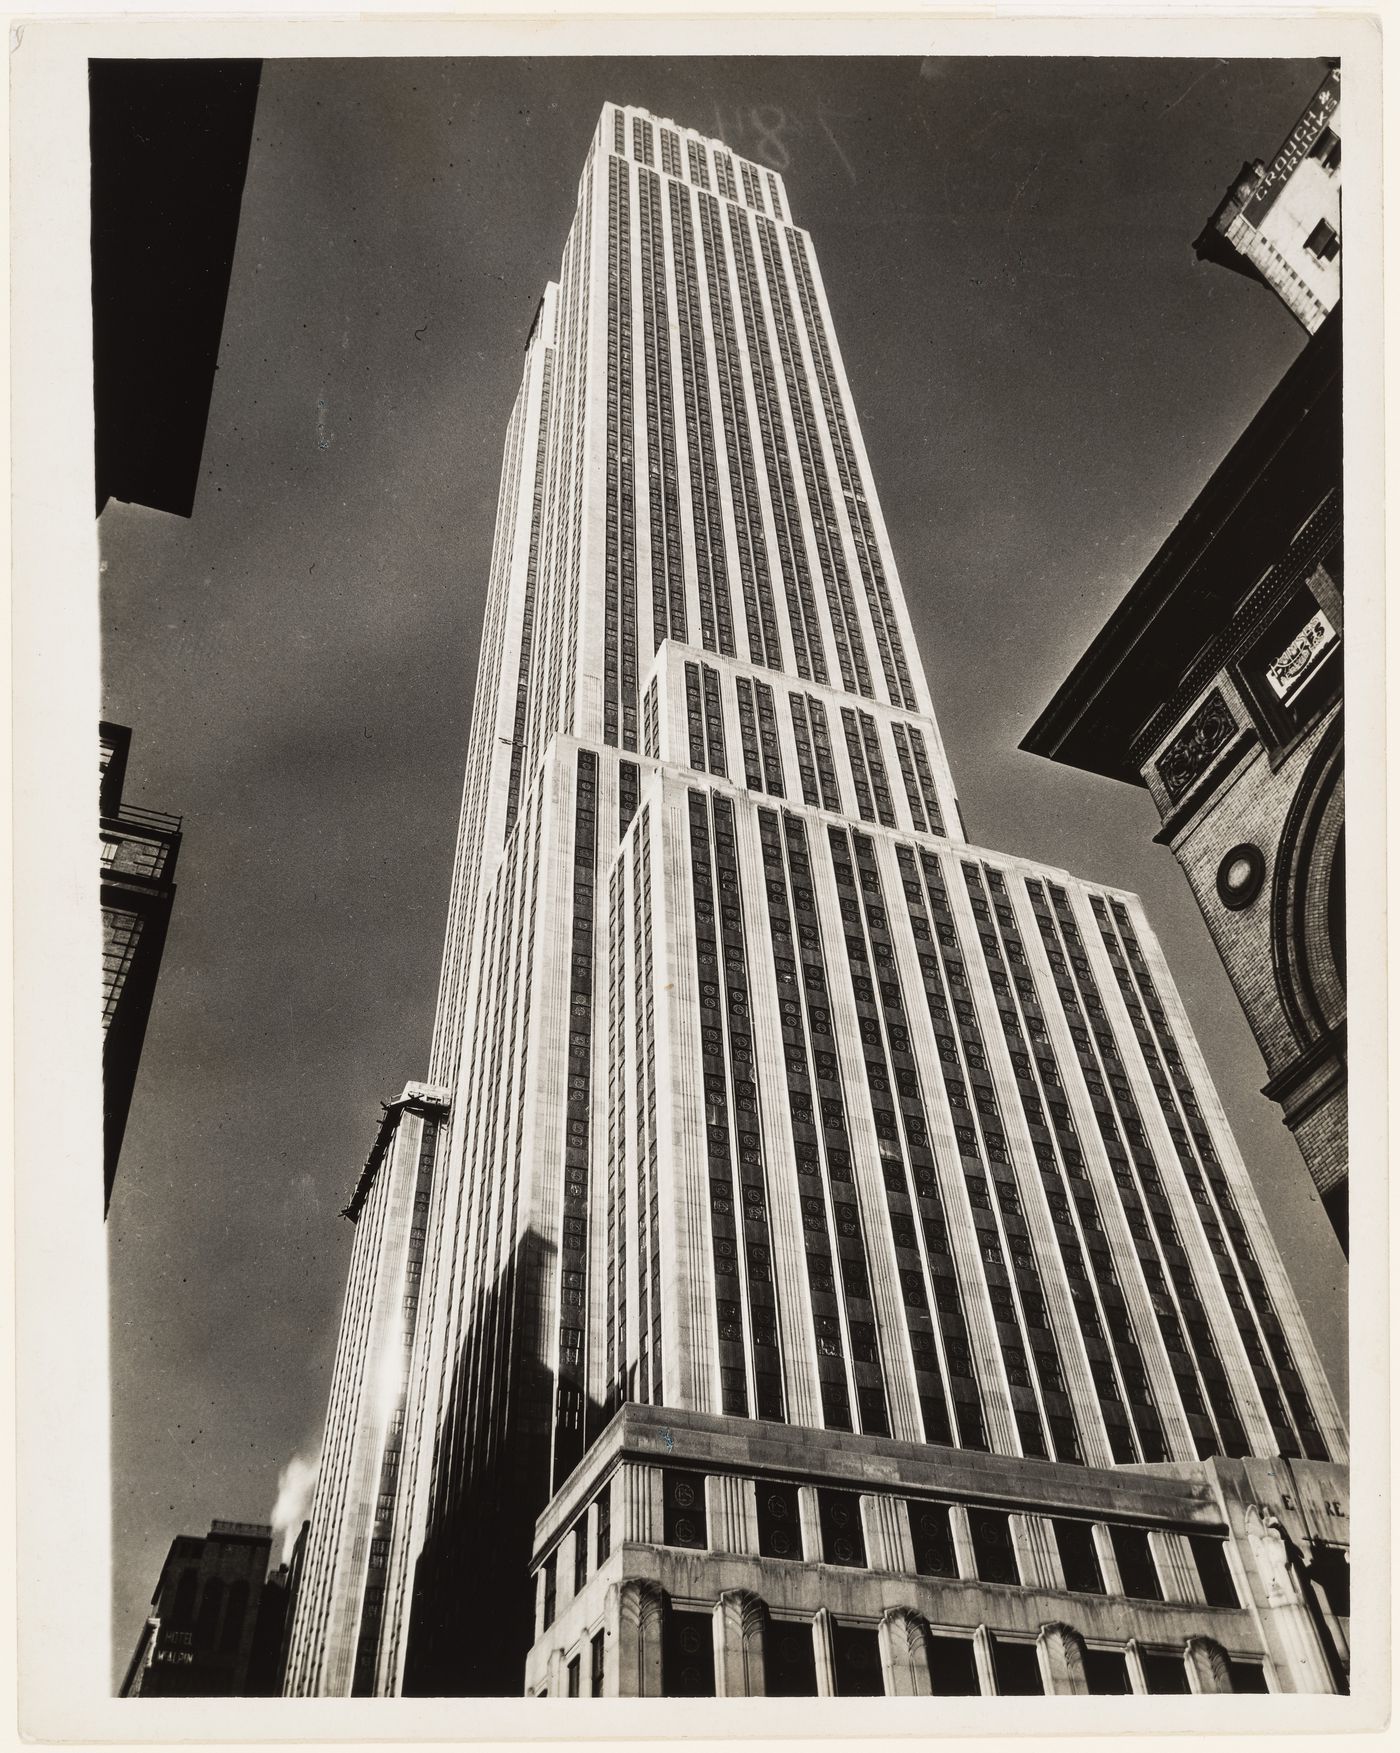 View looking up at Empire State Building, New York City, New York